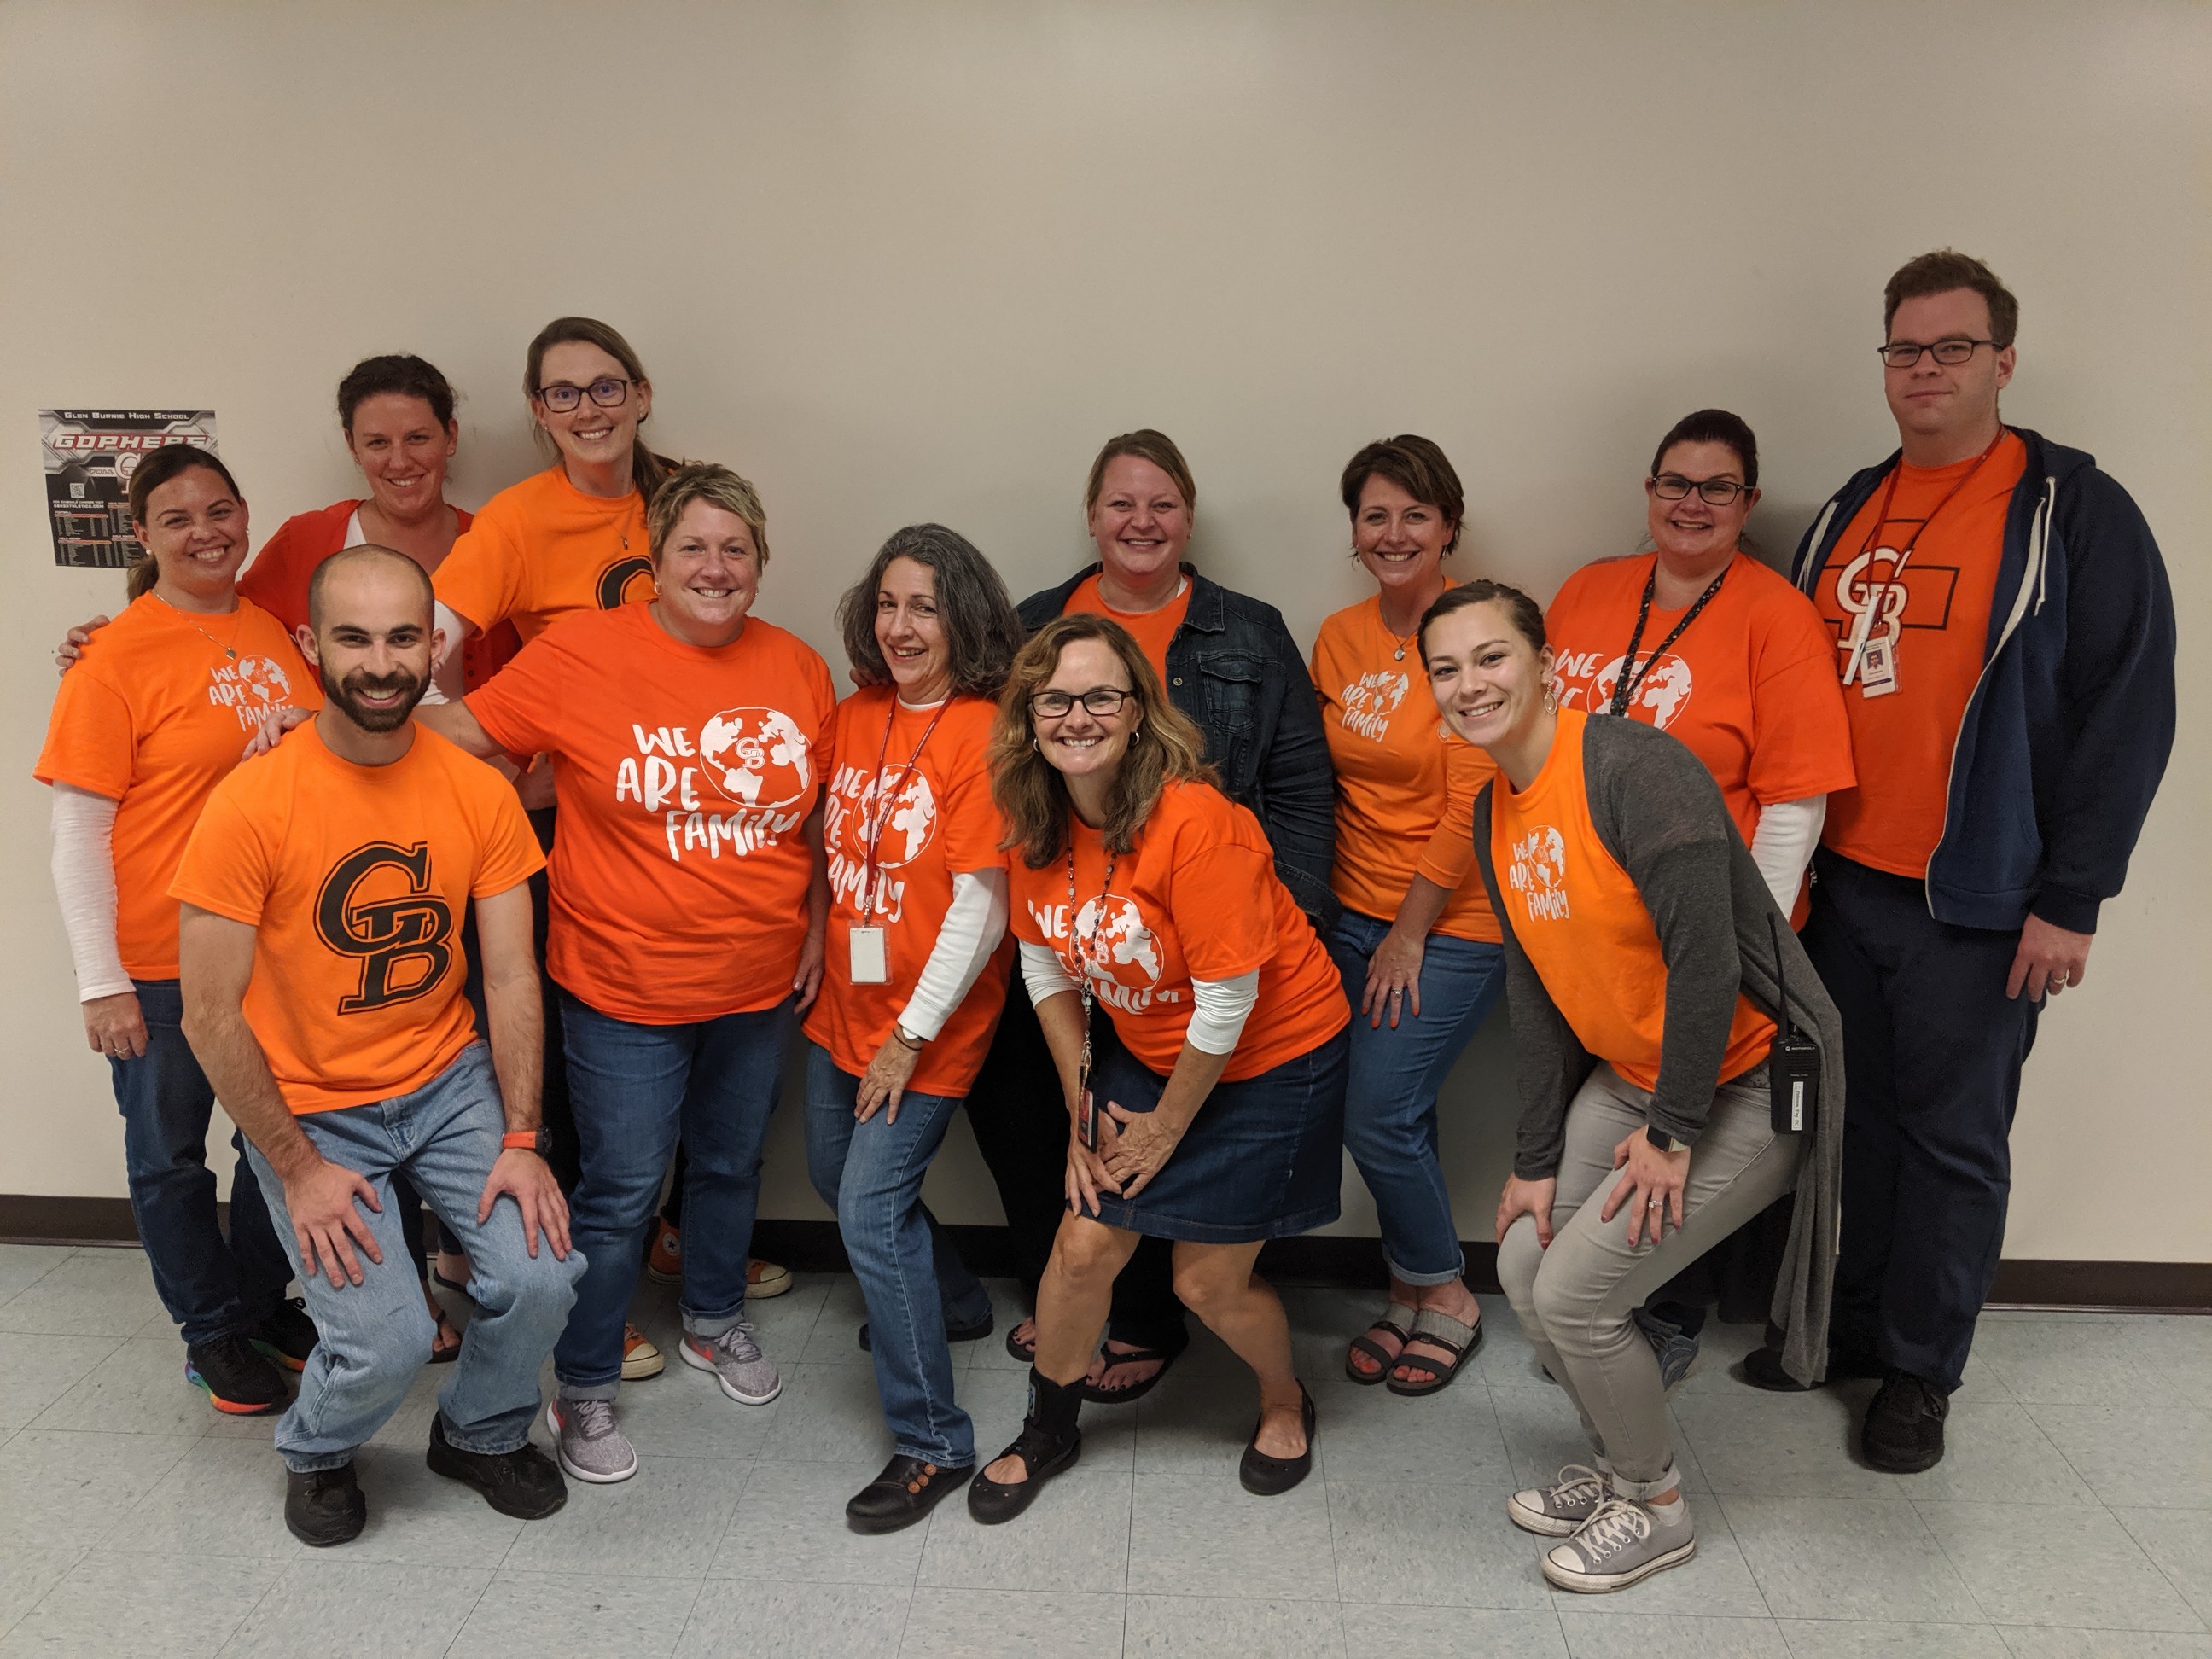 Group Photo of the Glen Burnie High School English Department wearing Orange Shirts for Unity Day